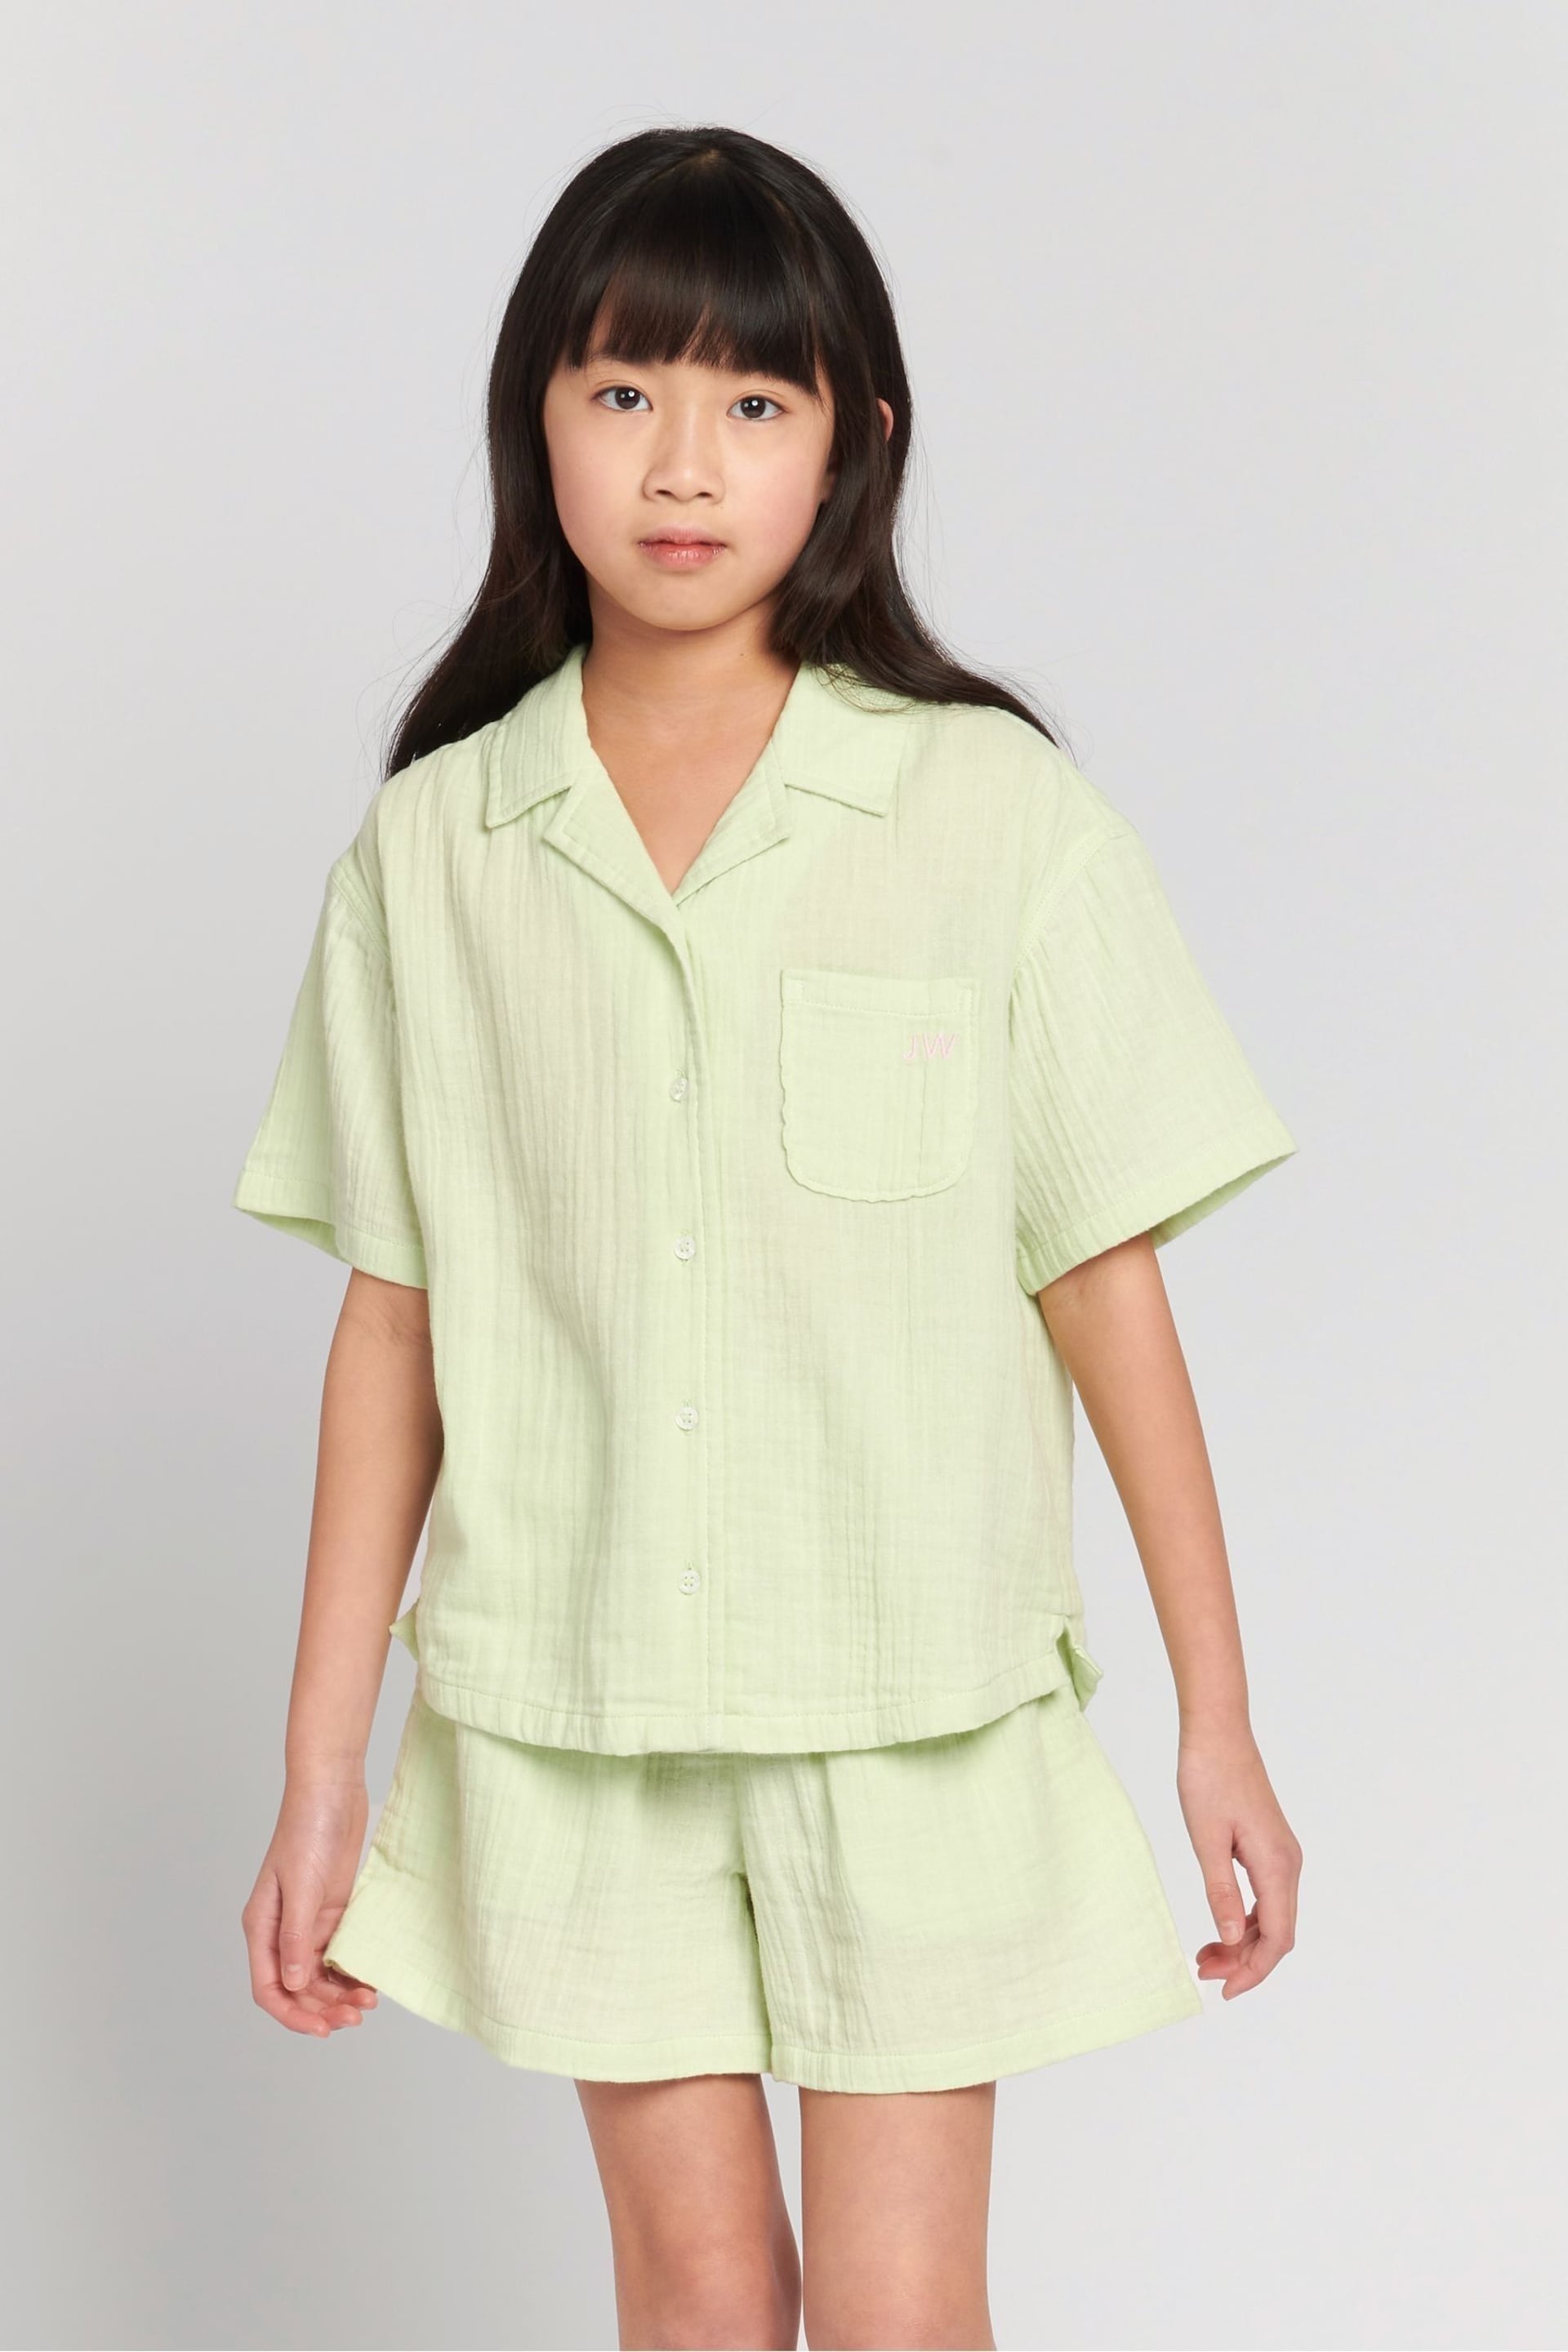 Jack Wills Relaxed Fit Girls Green Cuban Shirt - Image 1 of 8